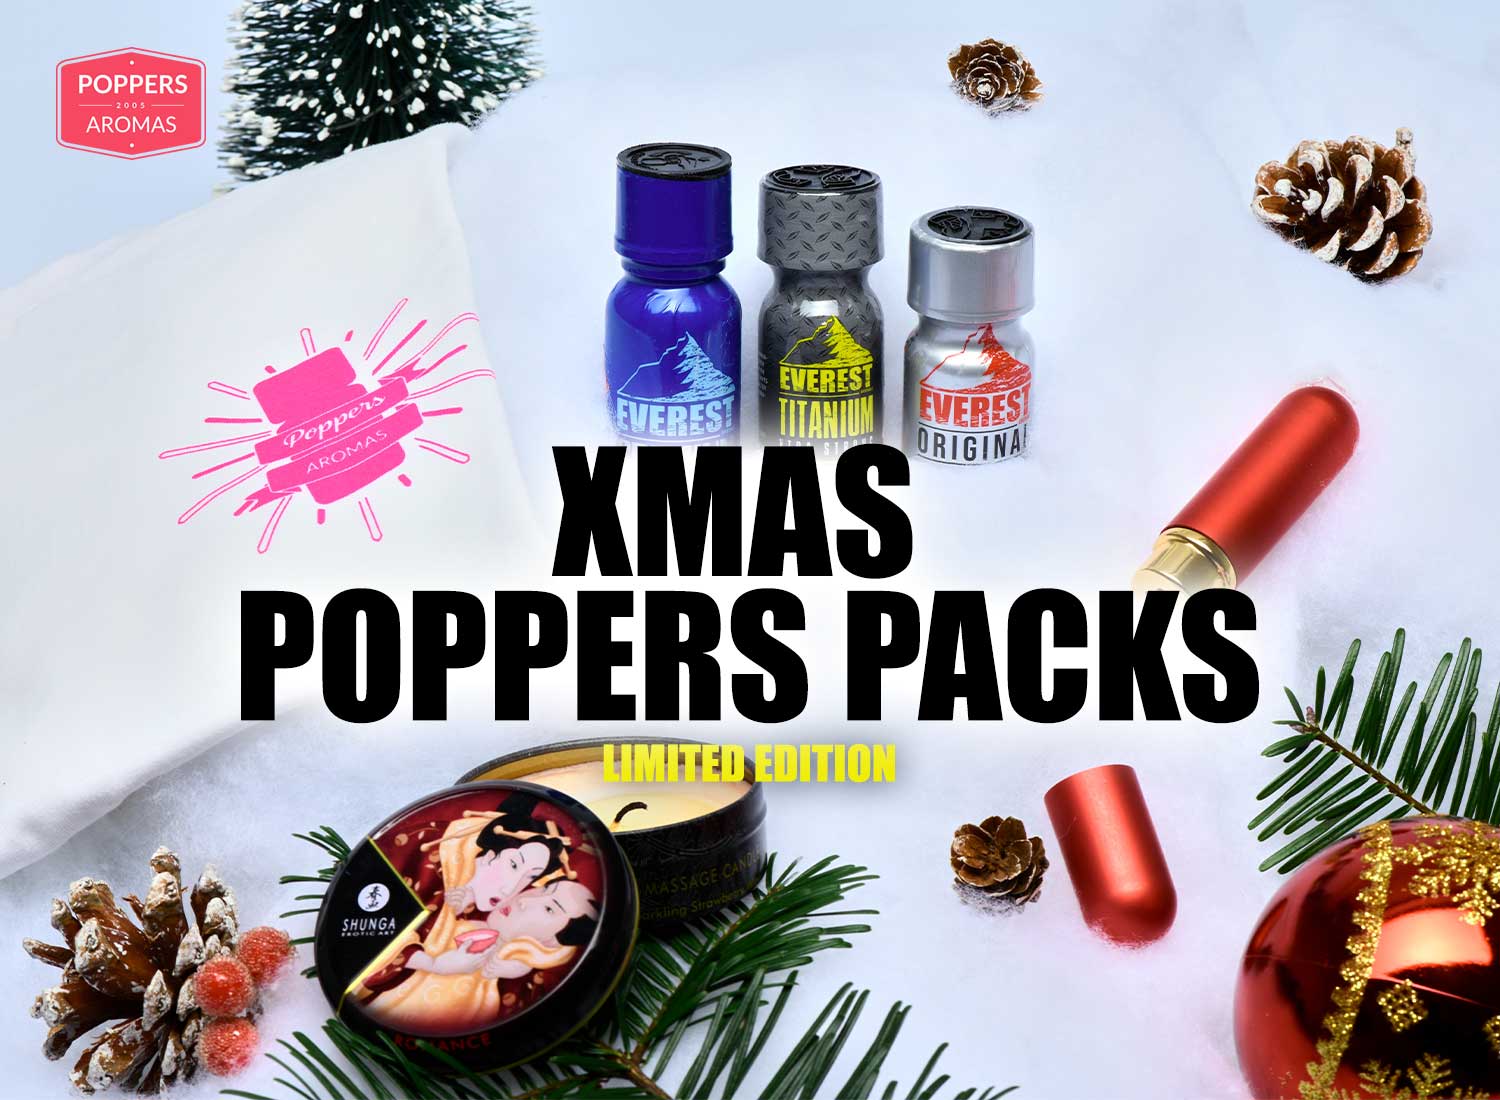 Xmas Poppers Pack on Poppers Aromas